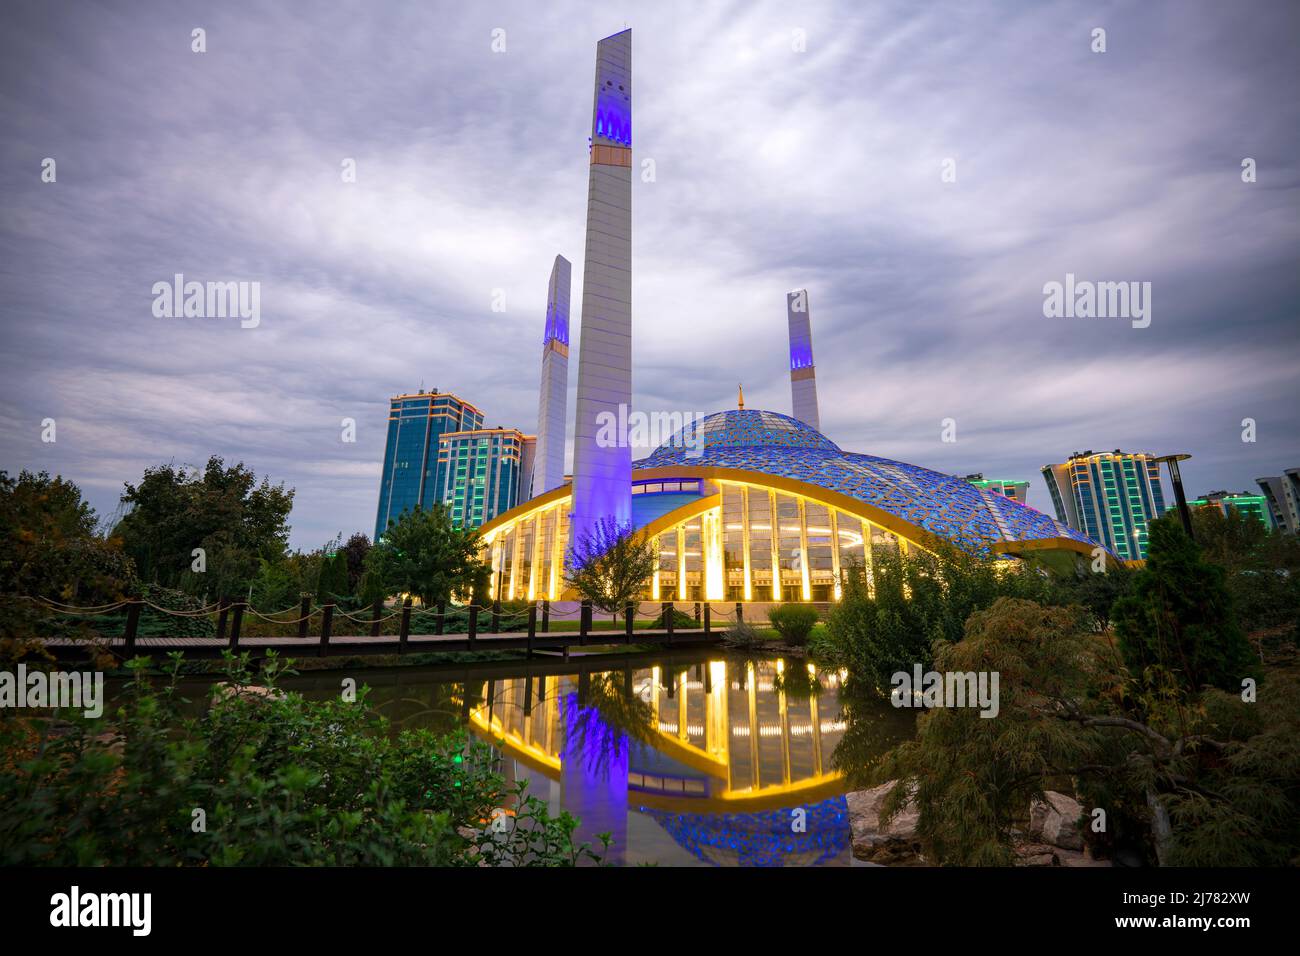 ARGUN, RUSSIA - SEPTEMBER 28, 2021: Mother's Heart Mosque in cityscape on a cloudy September evening Stock Photo